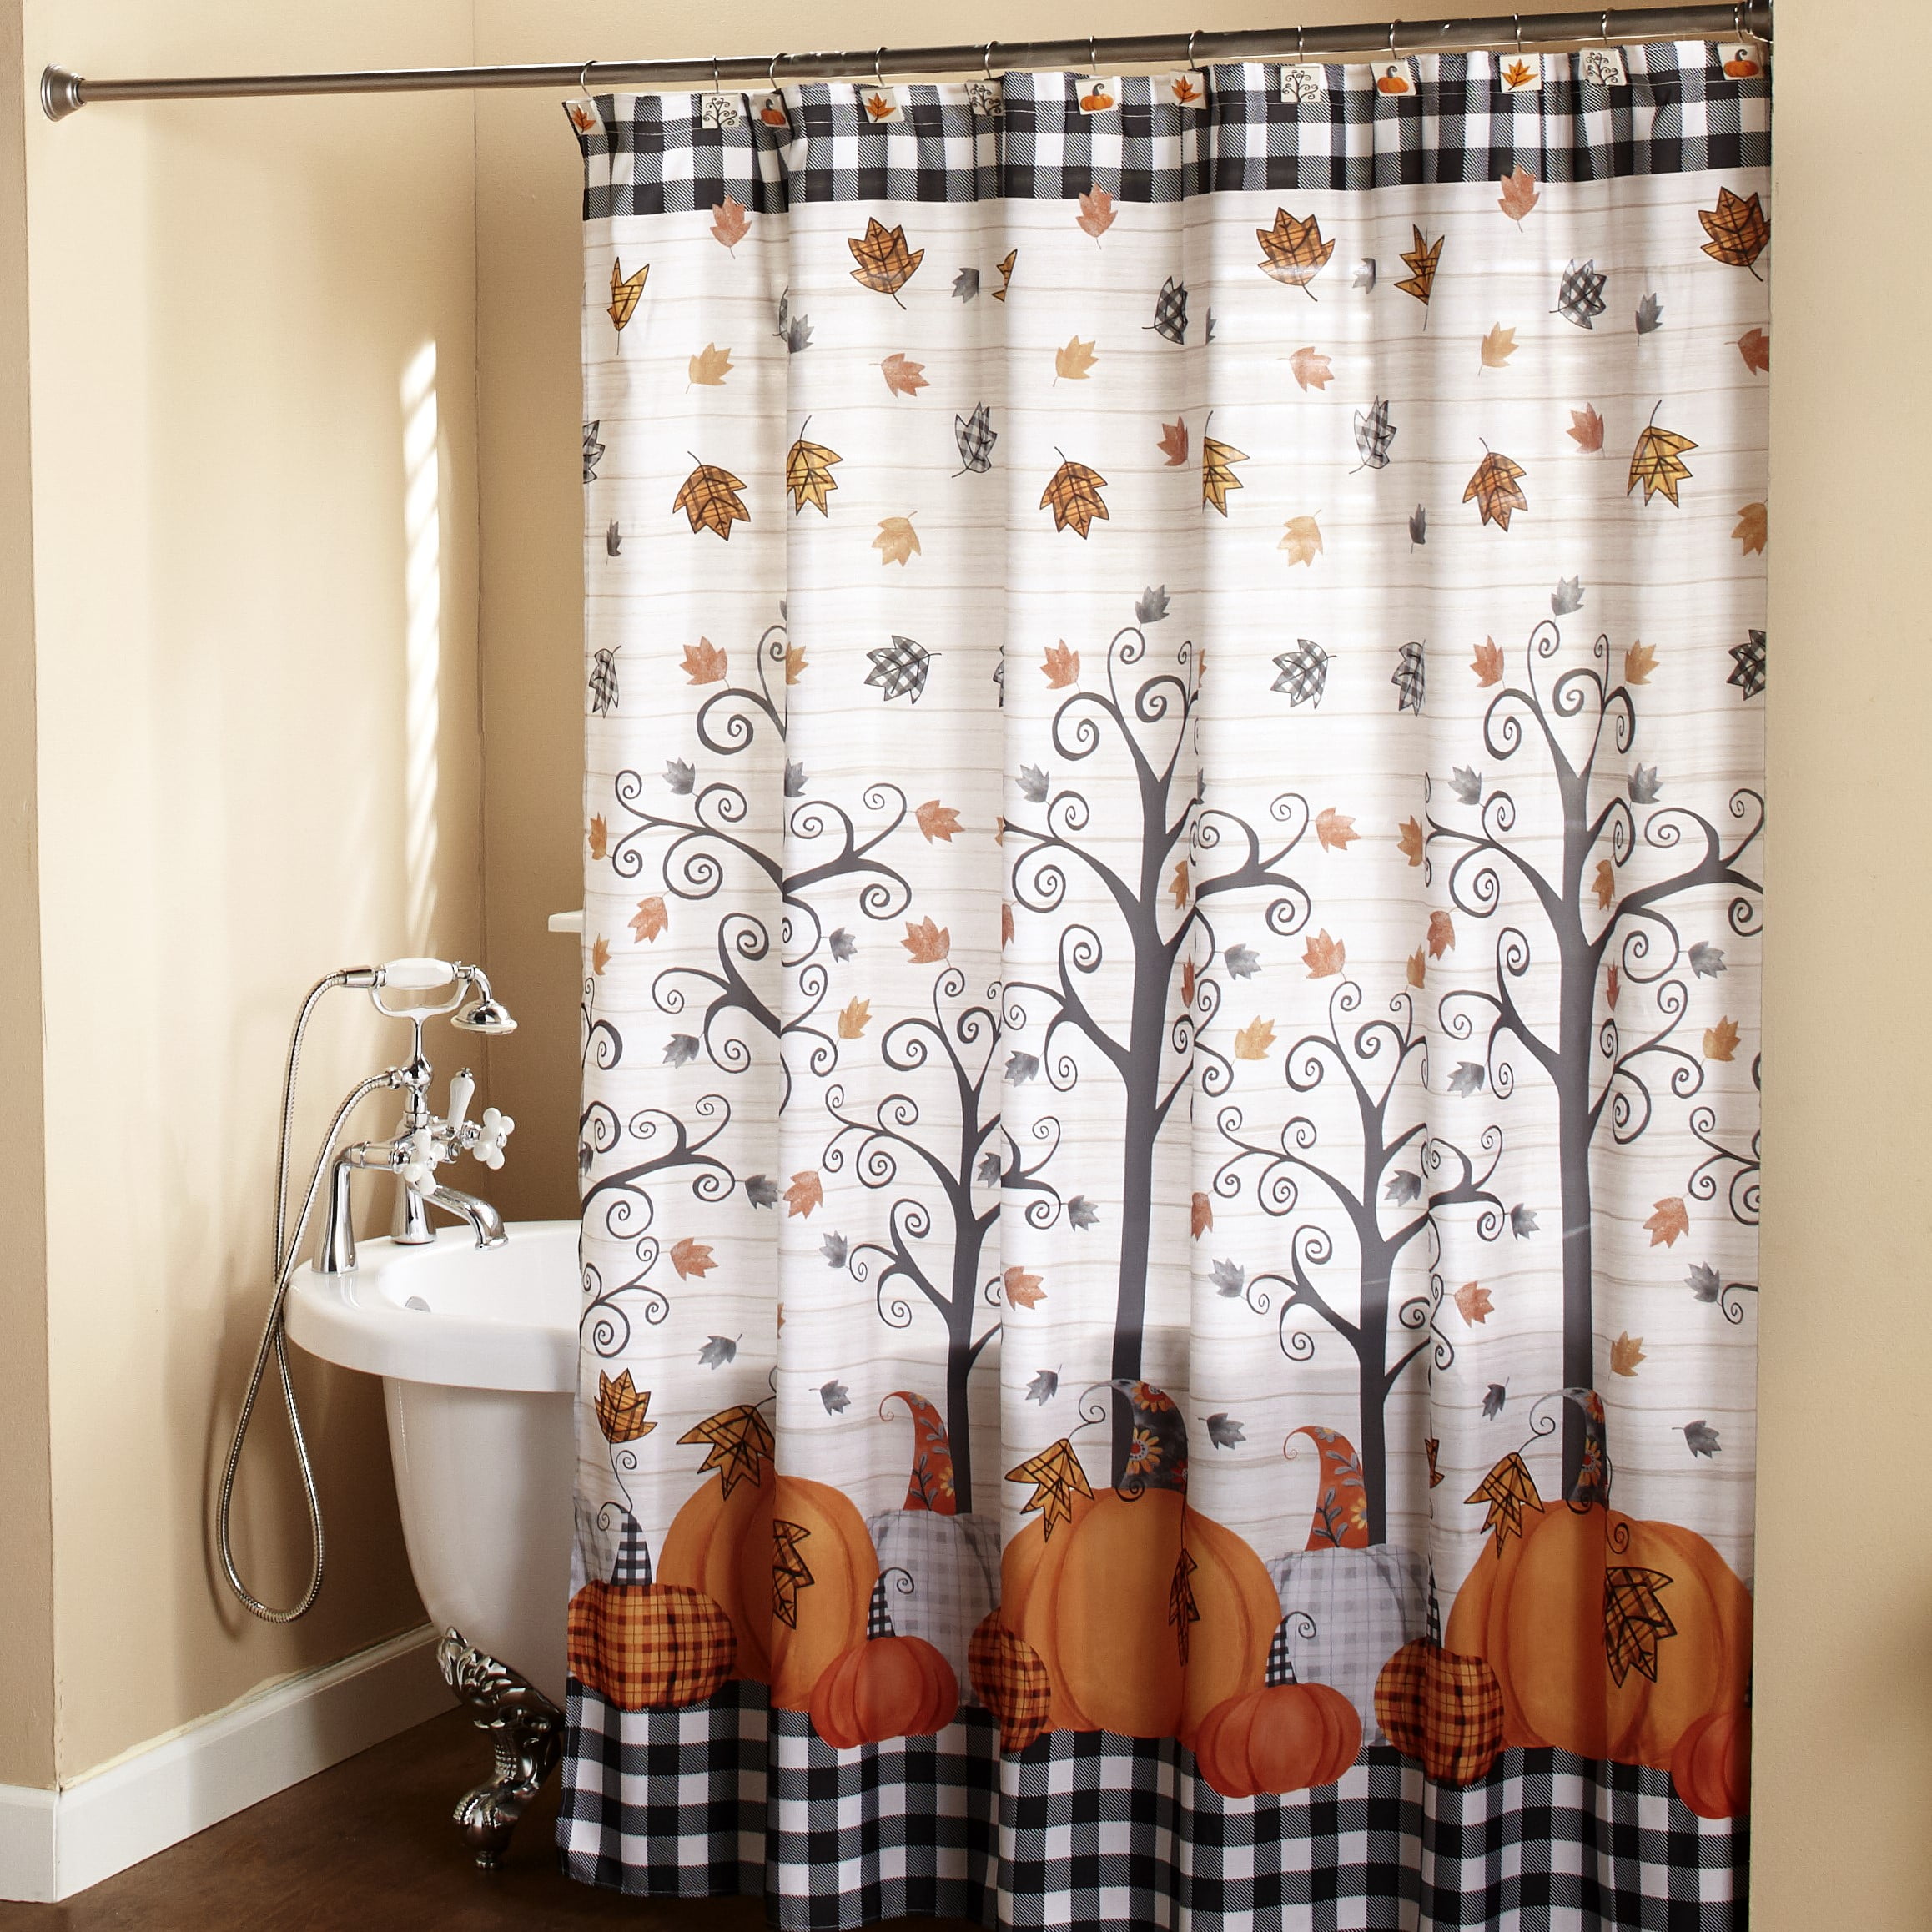 Details about   Fall Shower Curtain Forest in Autumn Print for Bathroom 